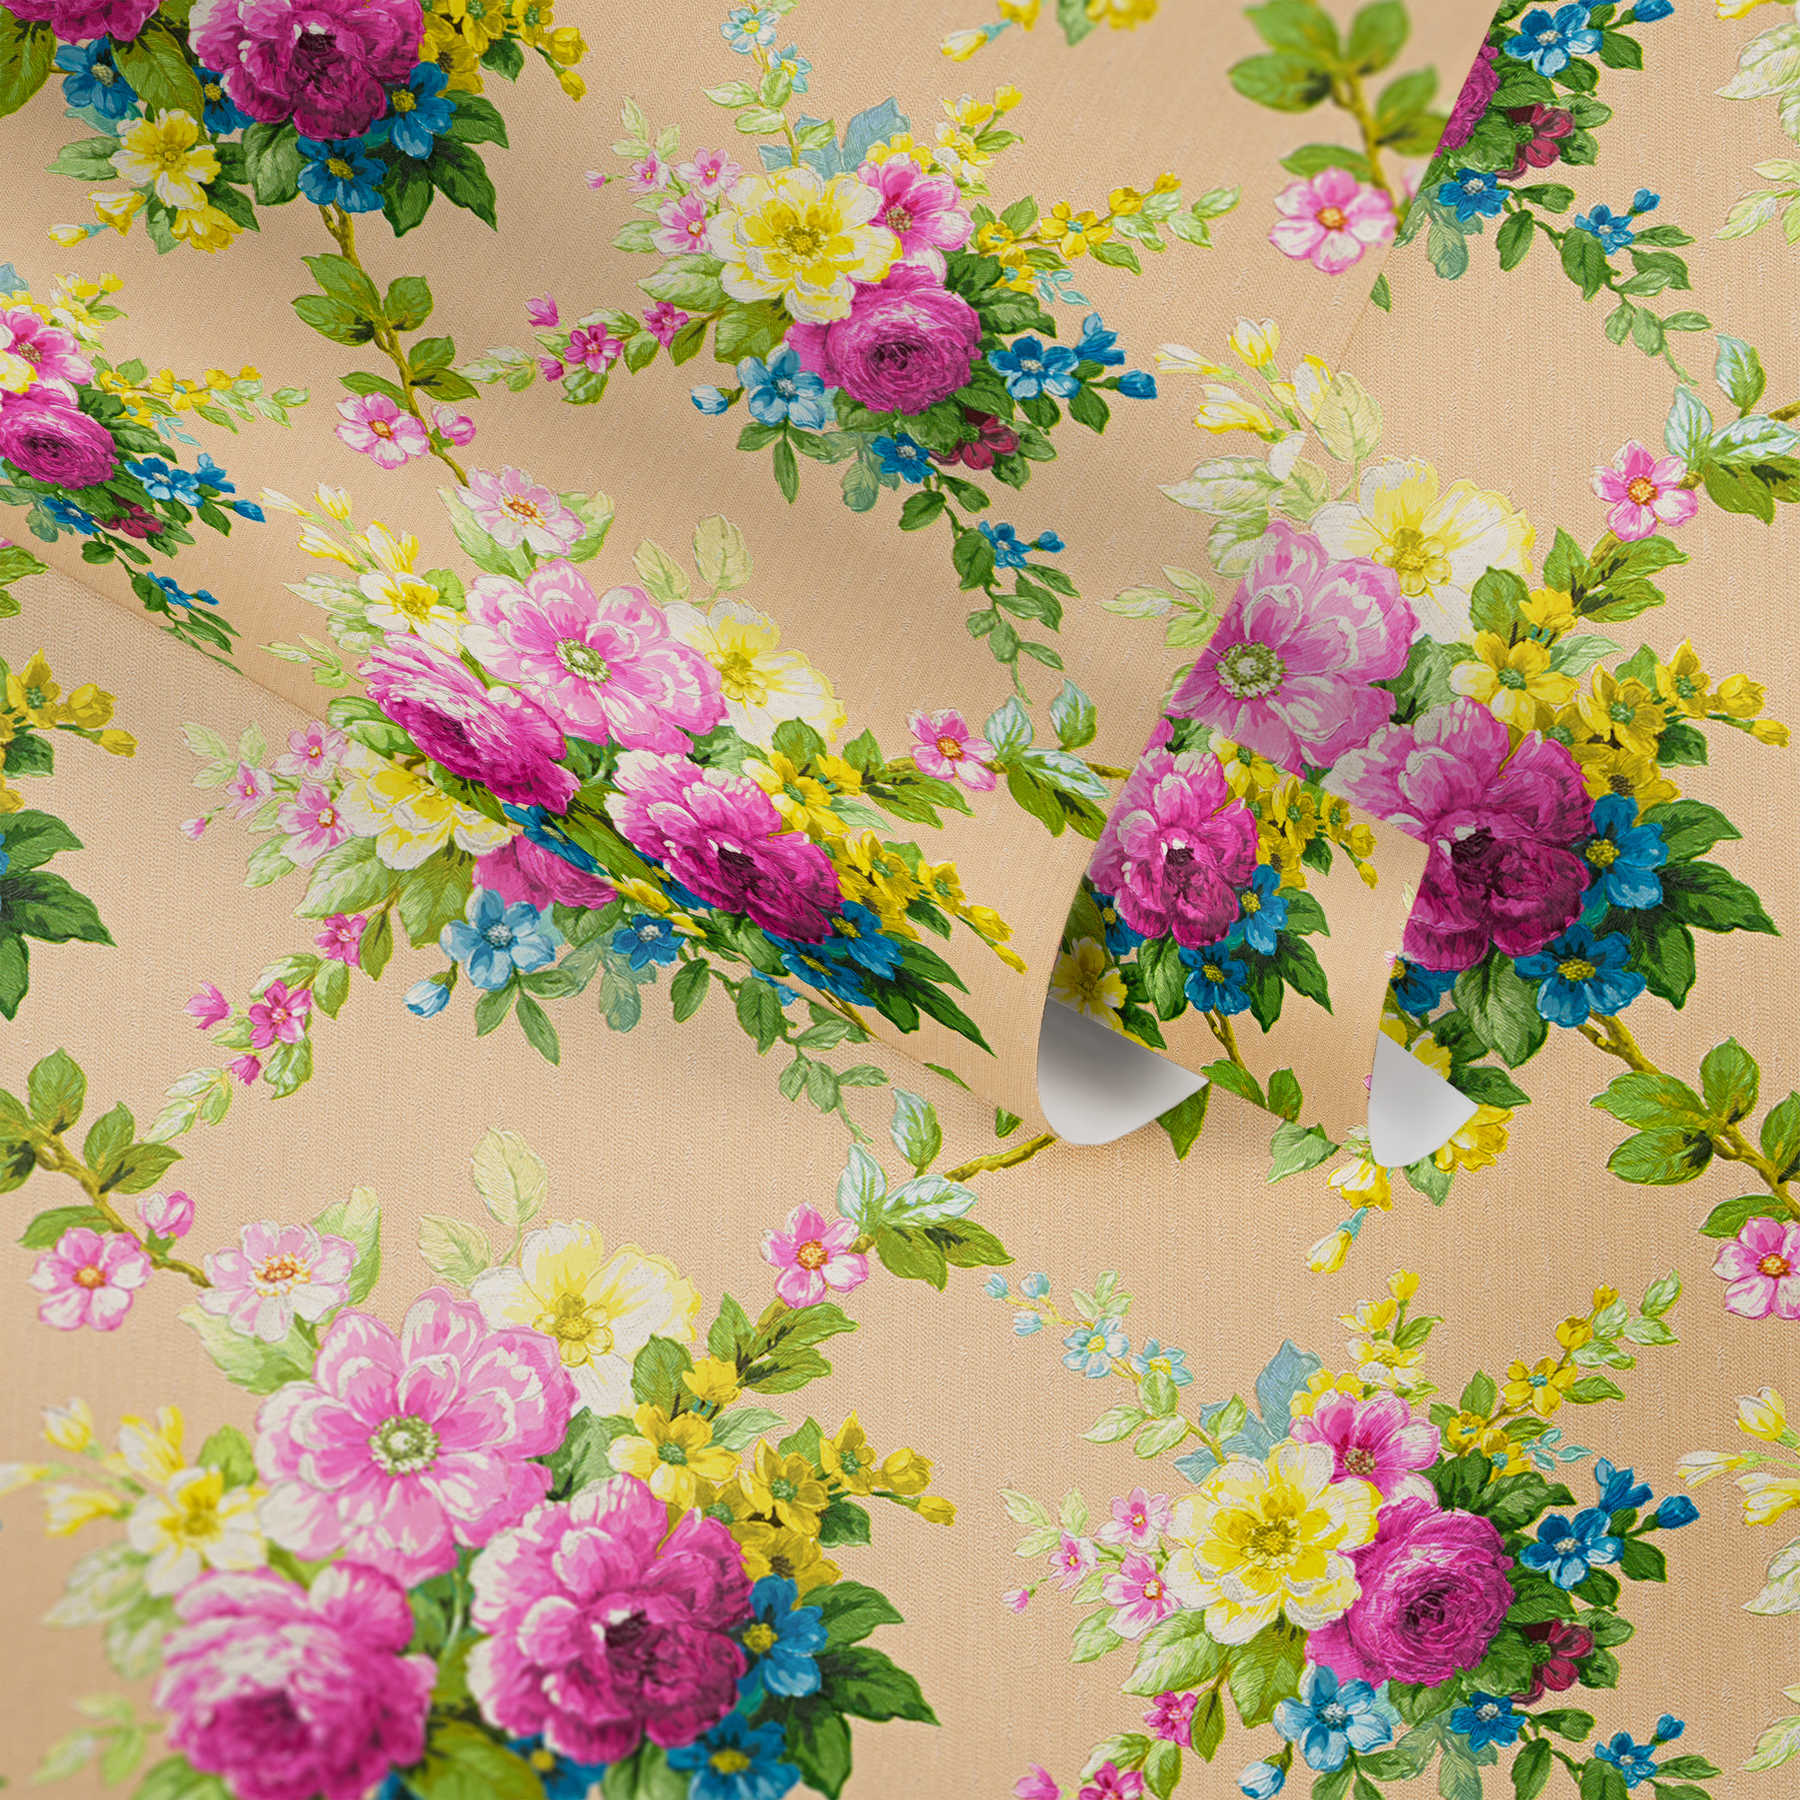             Wallpaper Flowers Decor floral ornament with metallic effect - multicoloured
        